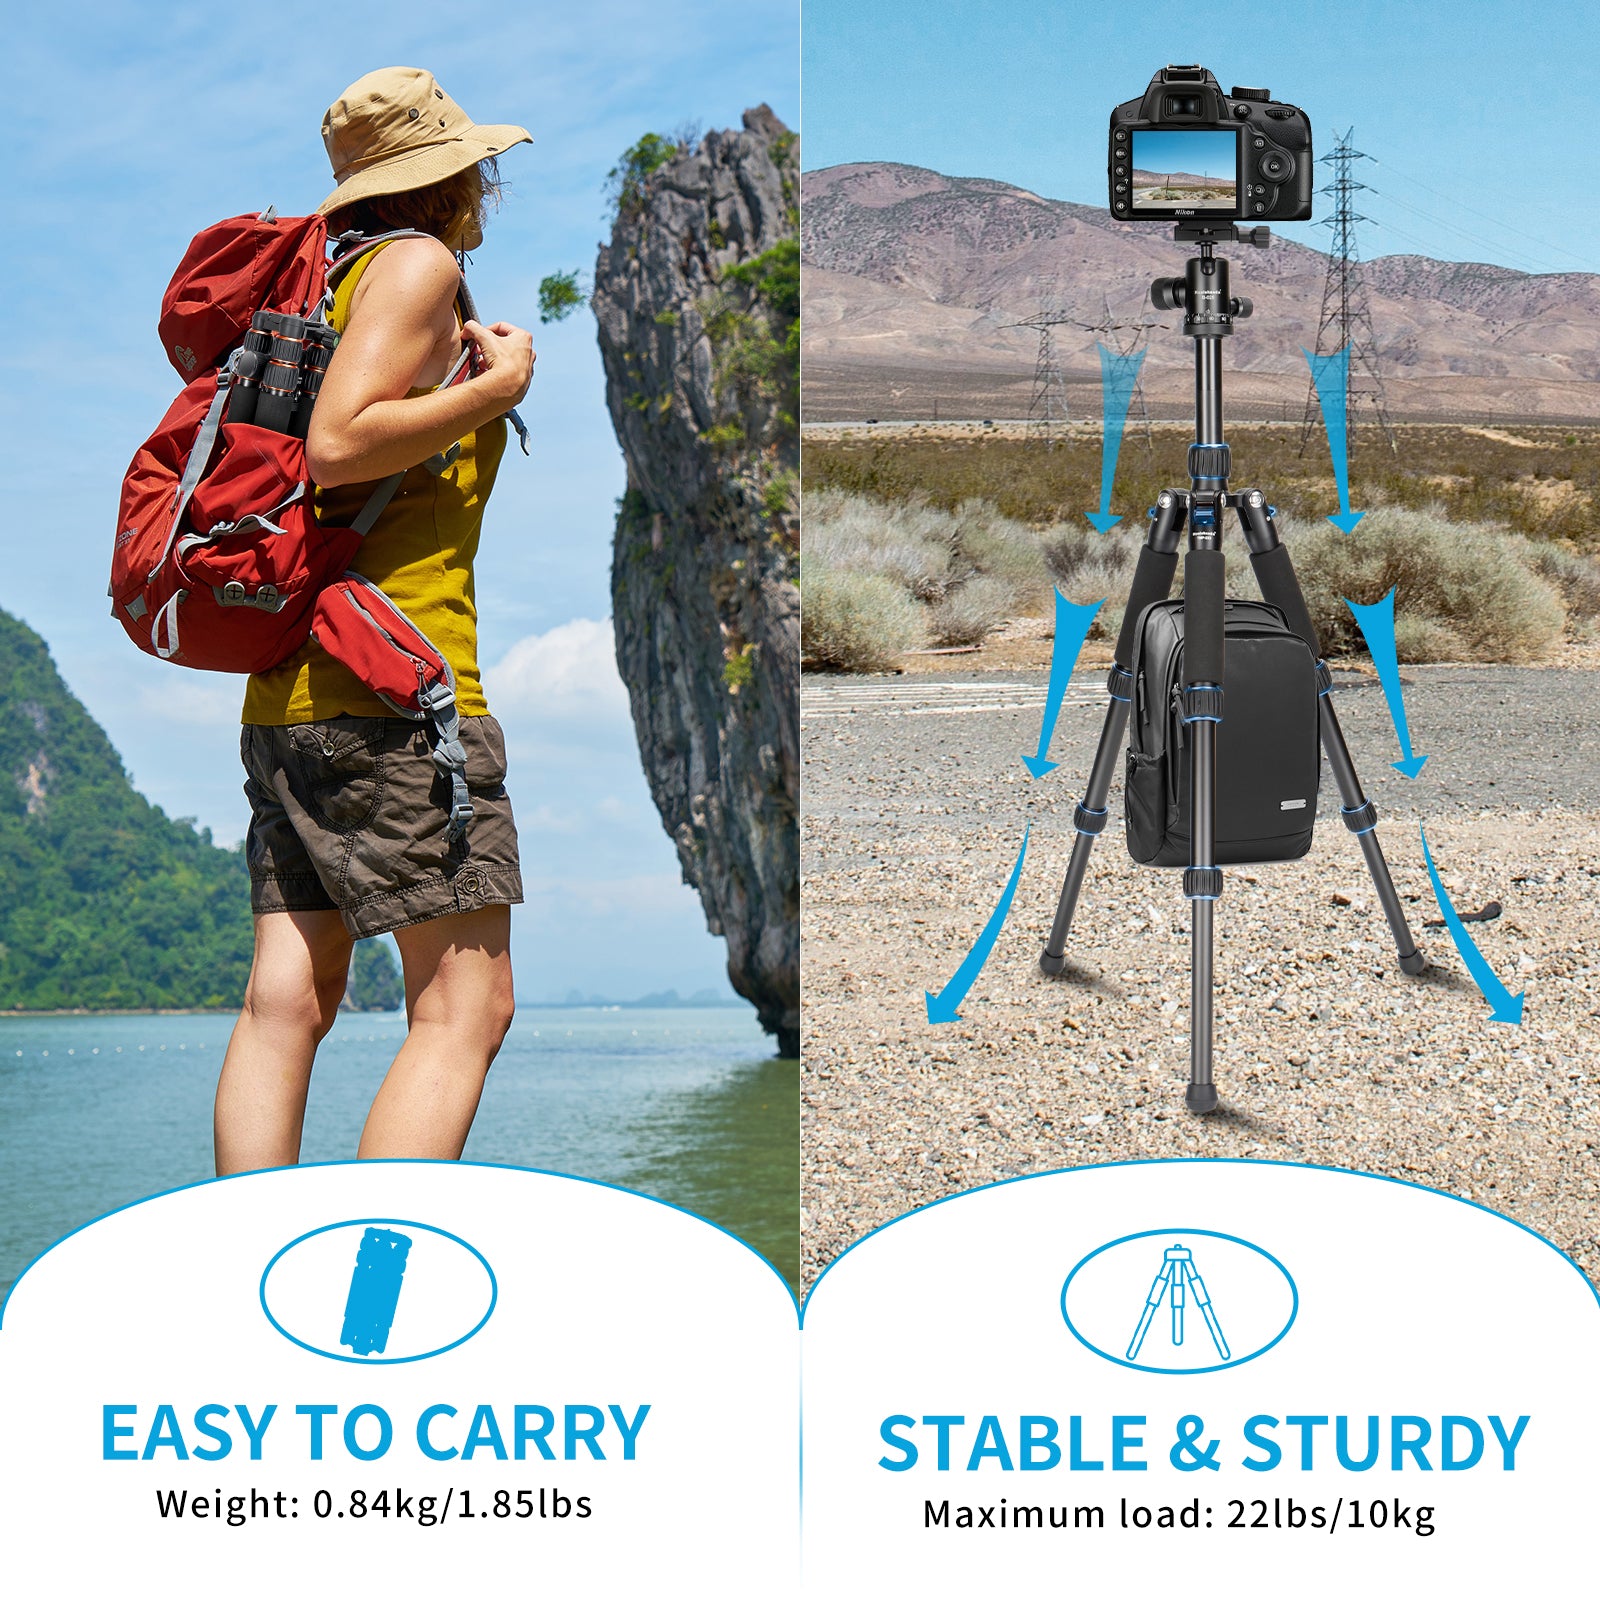 Koolehaoda Mini Tripod Aluminum Alloy Tabletop Tripod Height 21-63.5cm with Carrying Bag for DSLR Camera Video Camcorder, Load up to 22lbs /10kg - (TMP-223 Blue)